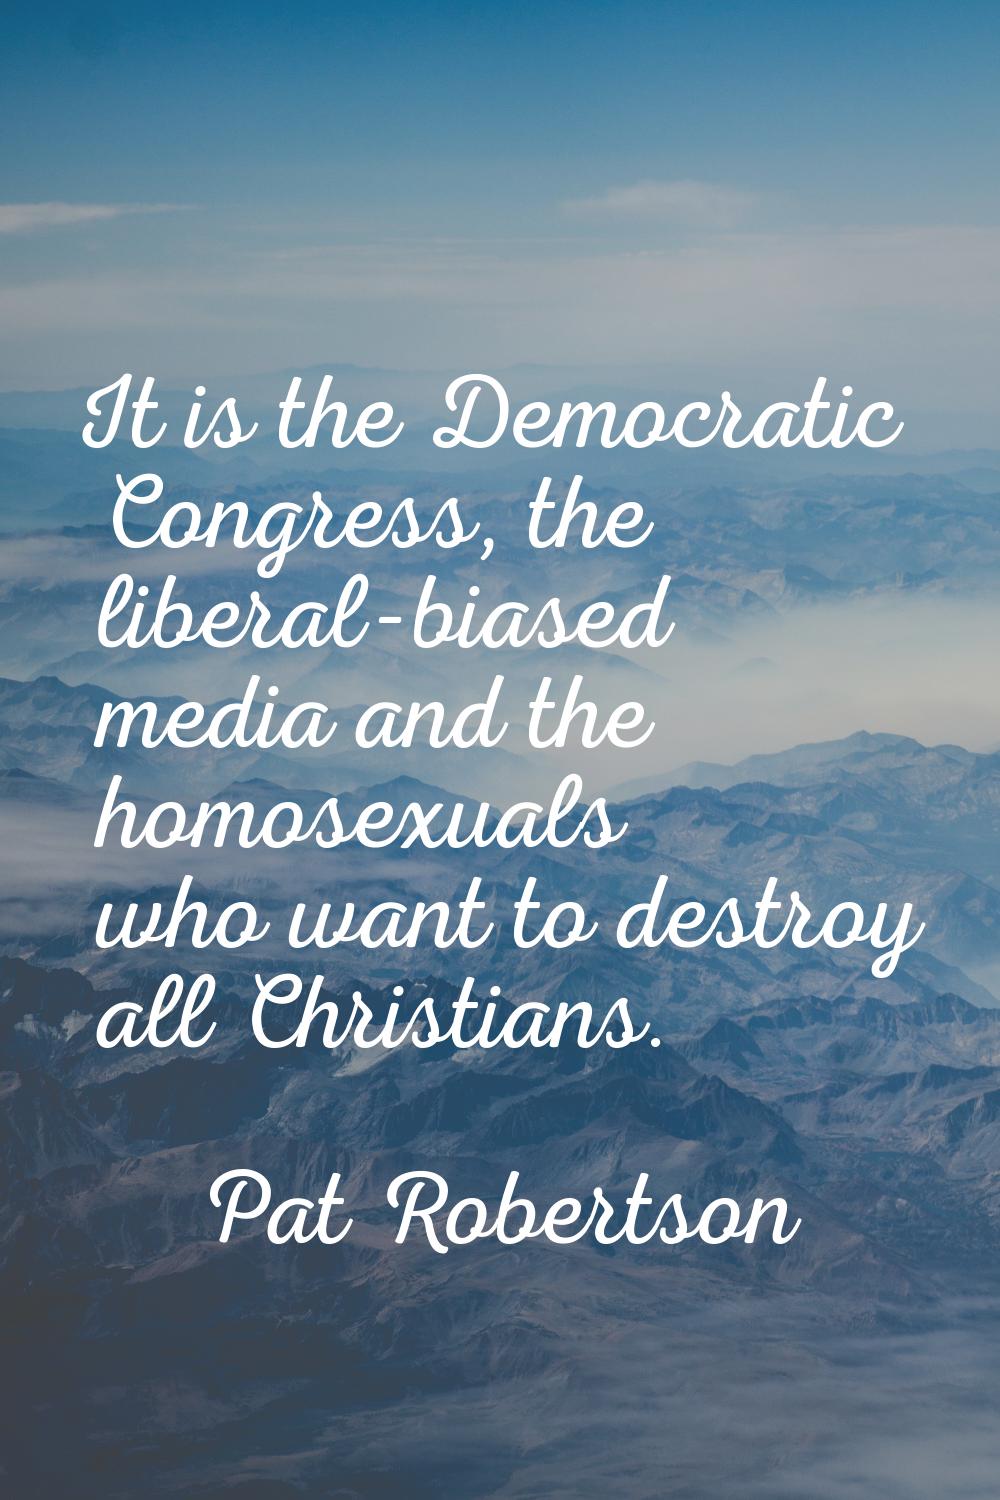 It is the Democratic Congress, the liberal-biased media and the homosexuals who want to destroy all